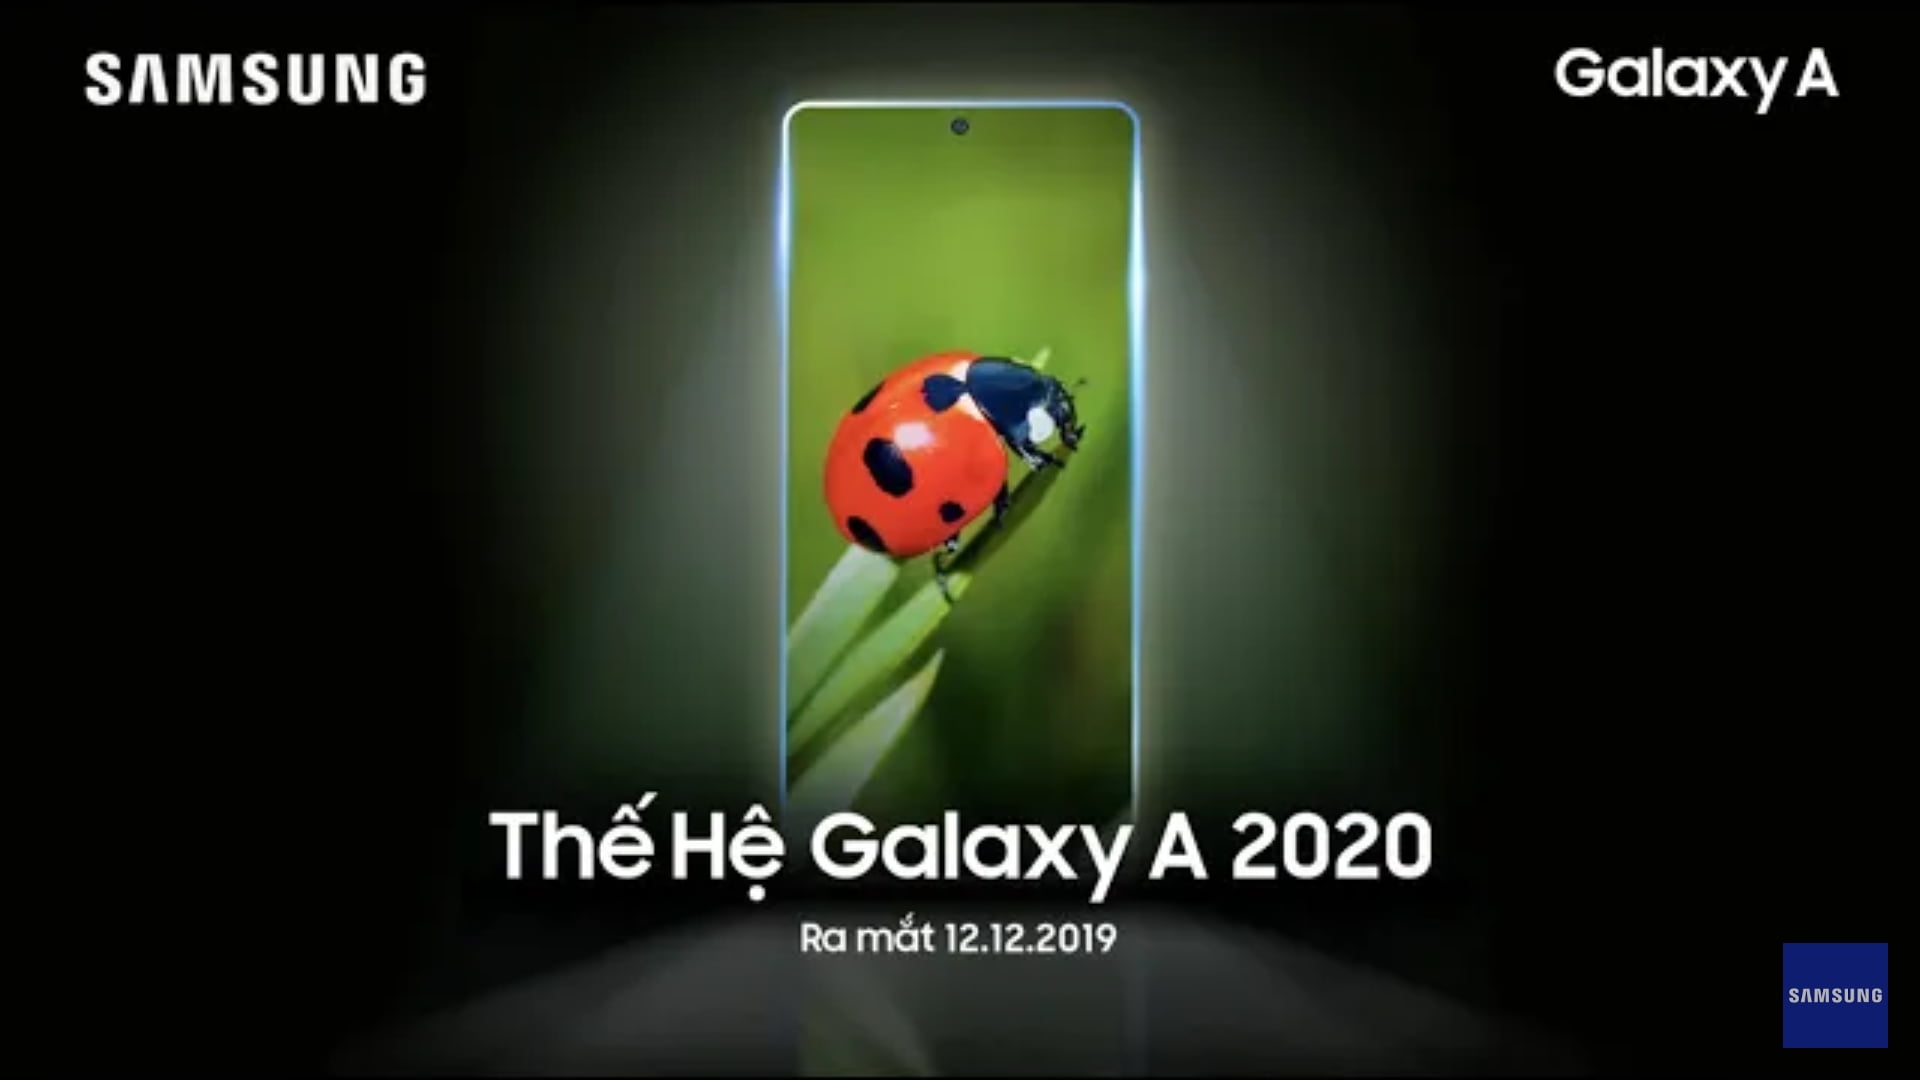 Samsung Teased The First Galaxy A (2020) Smartphone To Launch